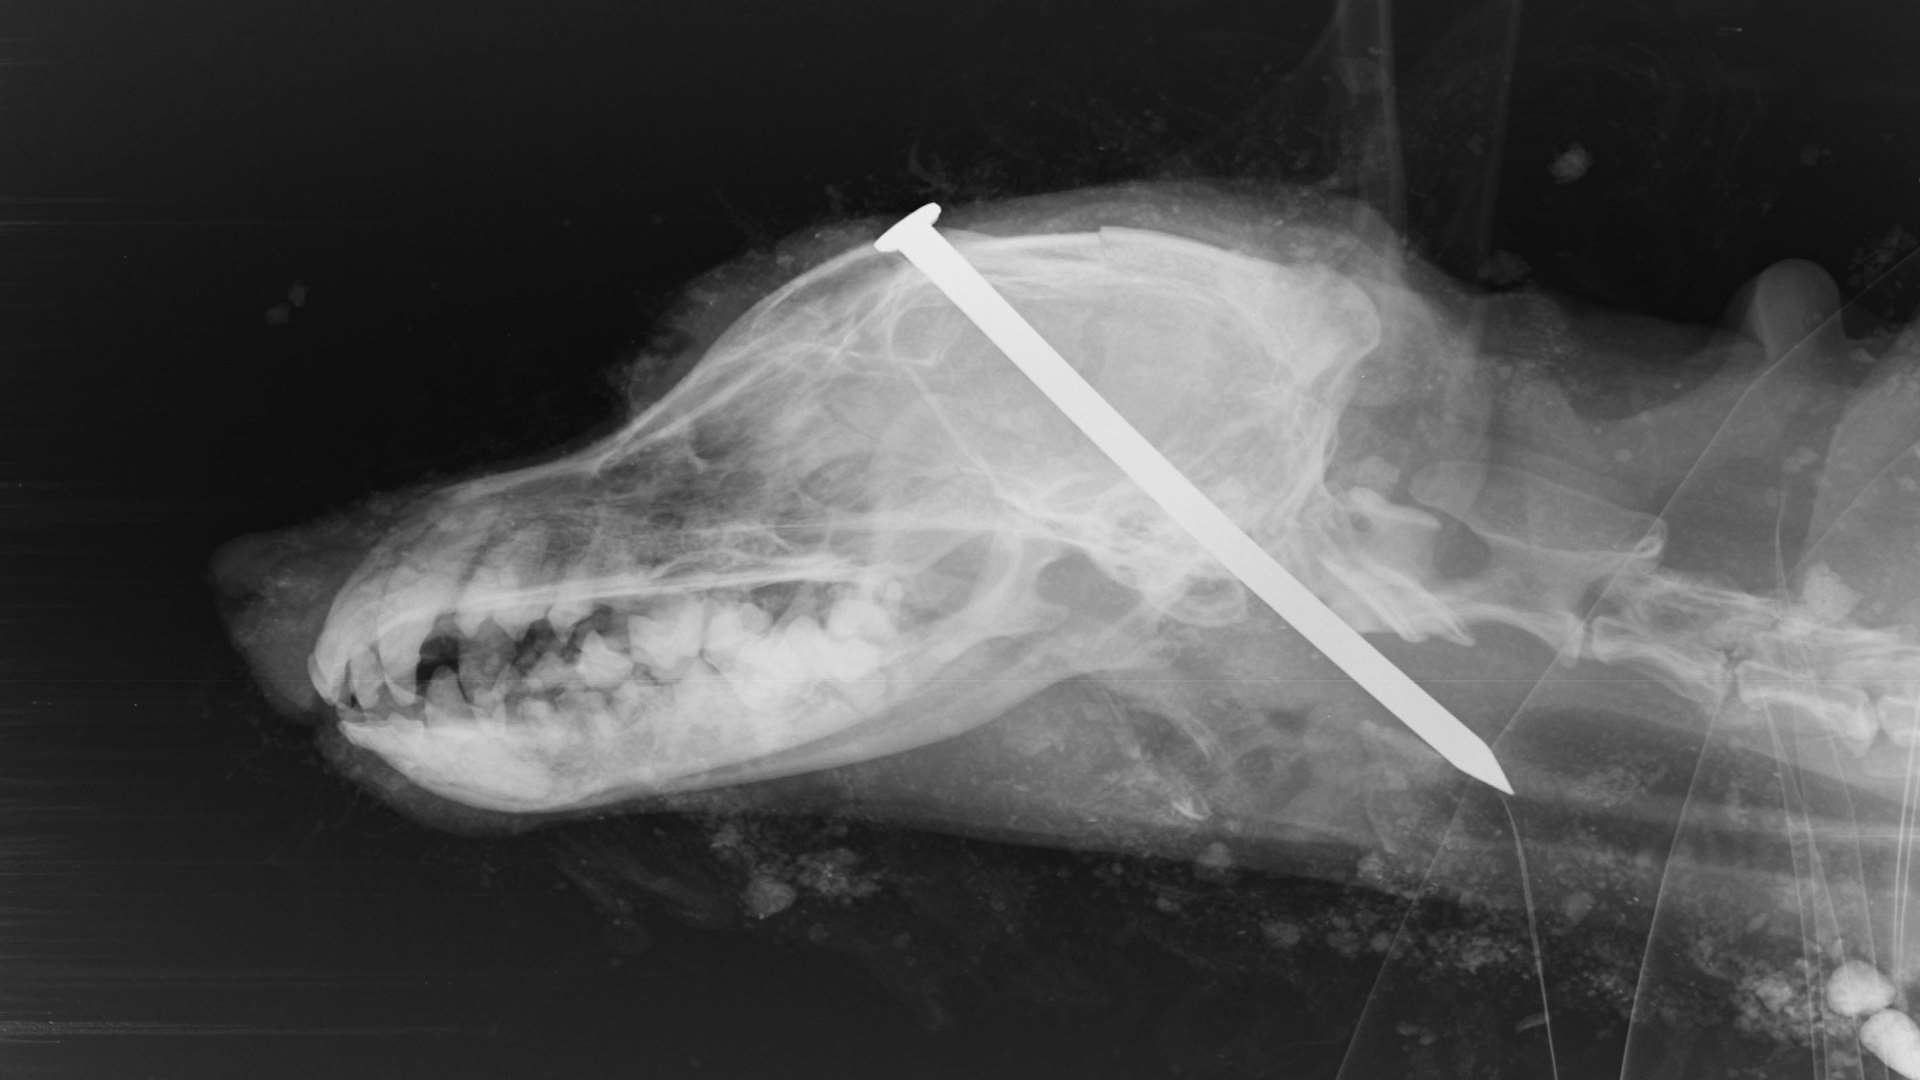 One of the animal cruelty cases dealt with by the RSPCA involved a dog buried alive with a nail hammered into its skull